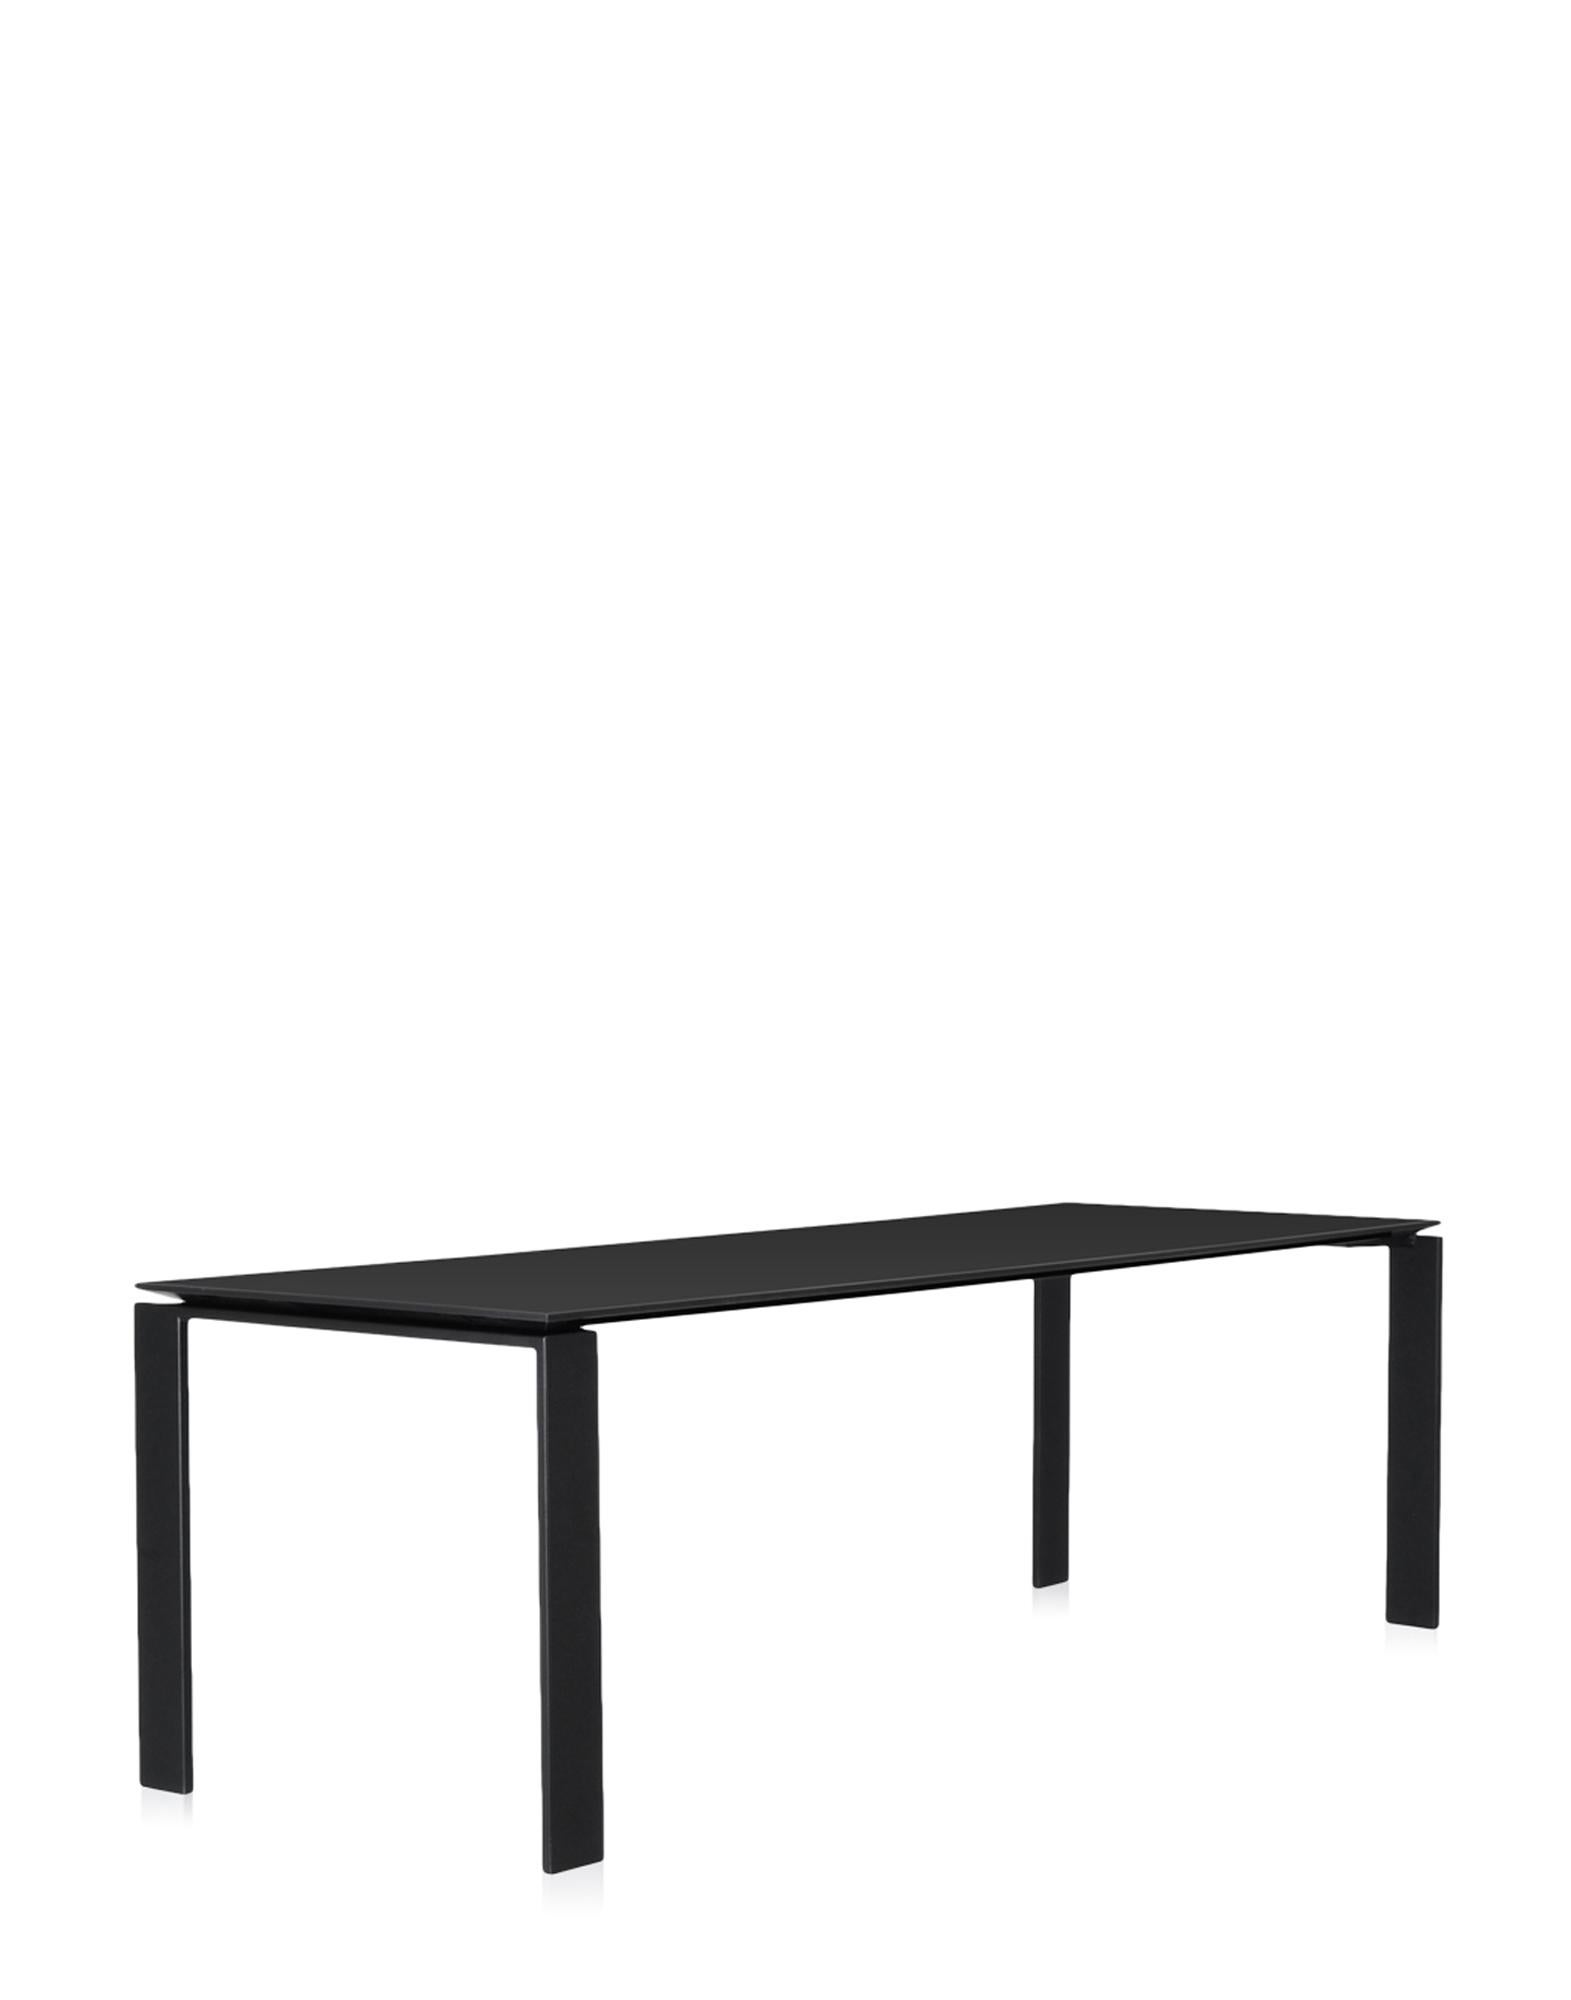 This functional and refined table also has a strict geometric design. Thanks to the elegant design solution, the position of the slim table top allows for the convenient positioning of drawers or storage furnishings for computer hardware. They can